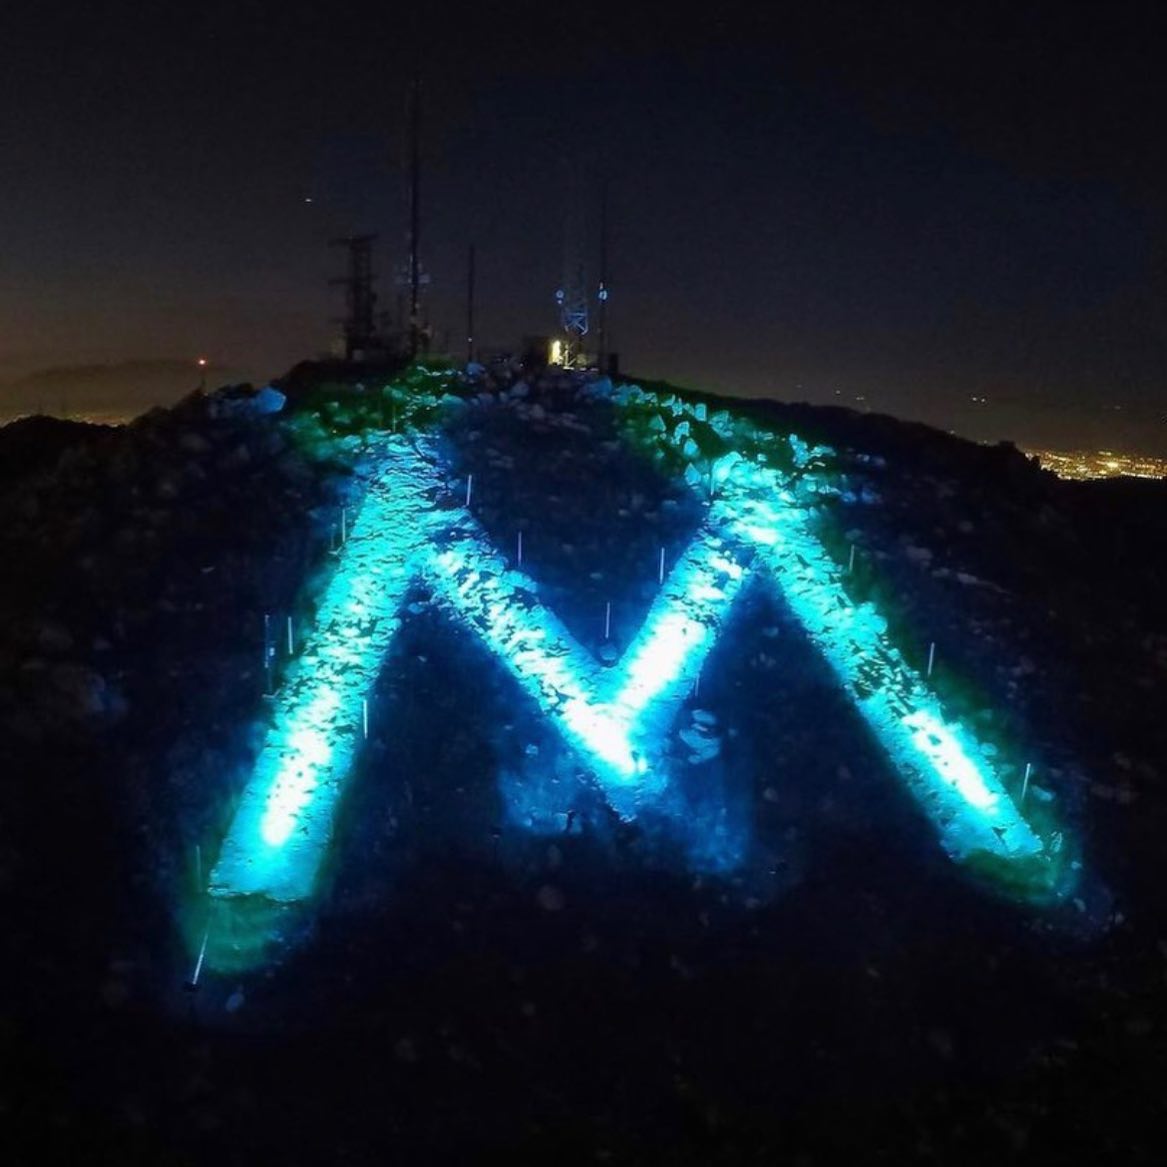 Tonight, the M on Box Springs Mountain will be lit teal in honor of Tourette Awareness Month.
.
.
#morenovalley #ilovemoval #mlighting #tourettes #tourettessyndrome